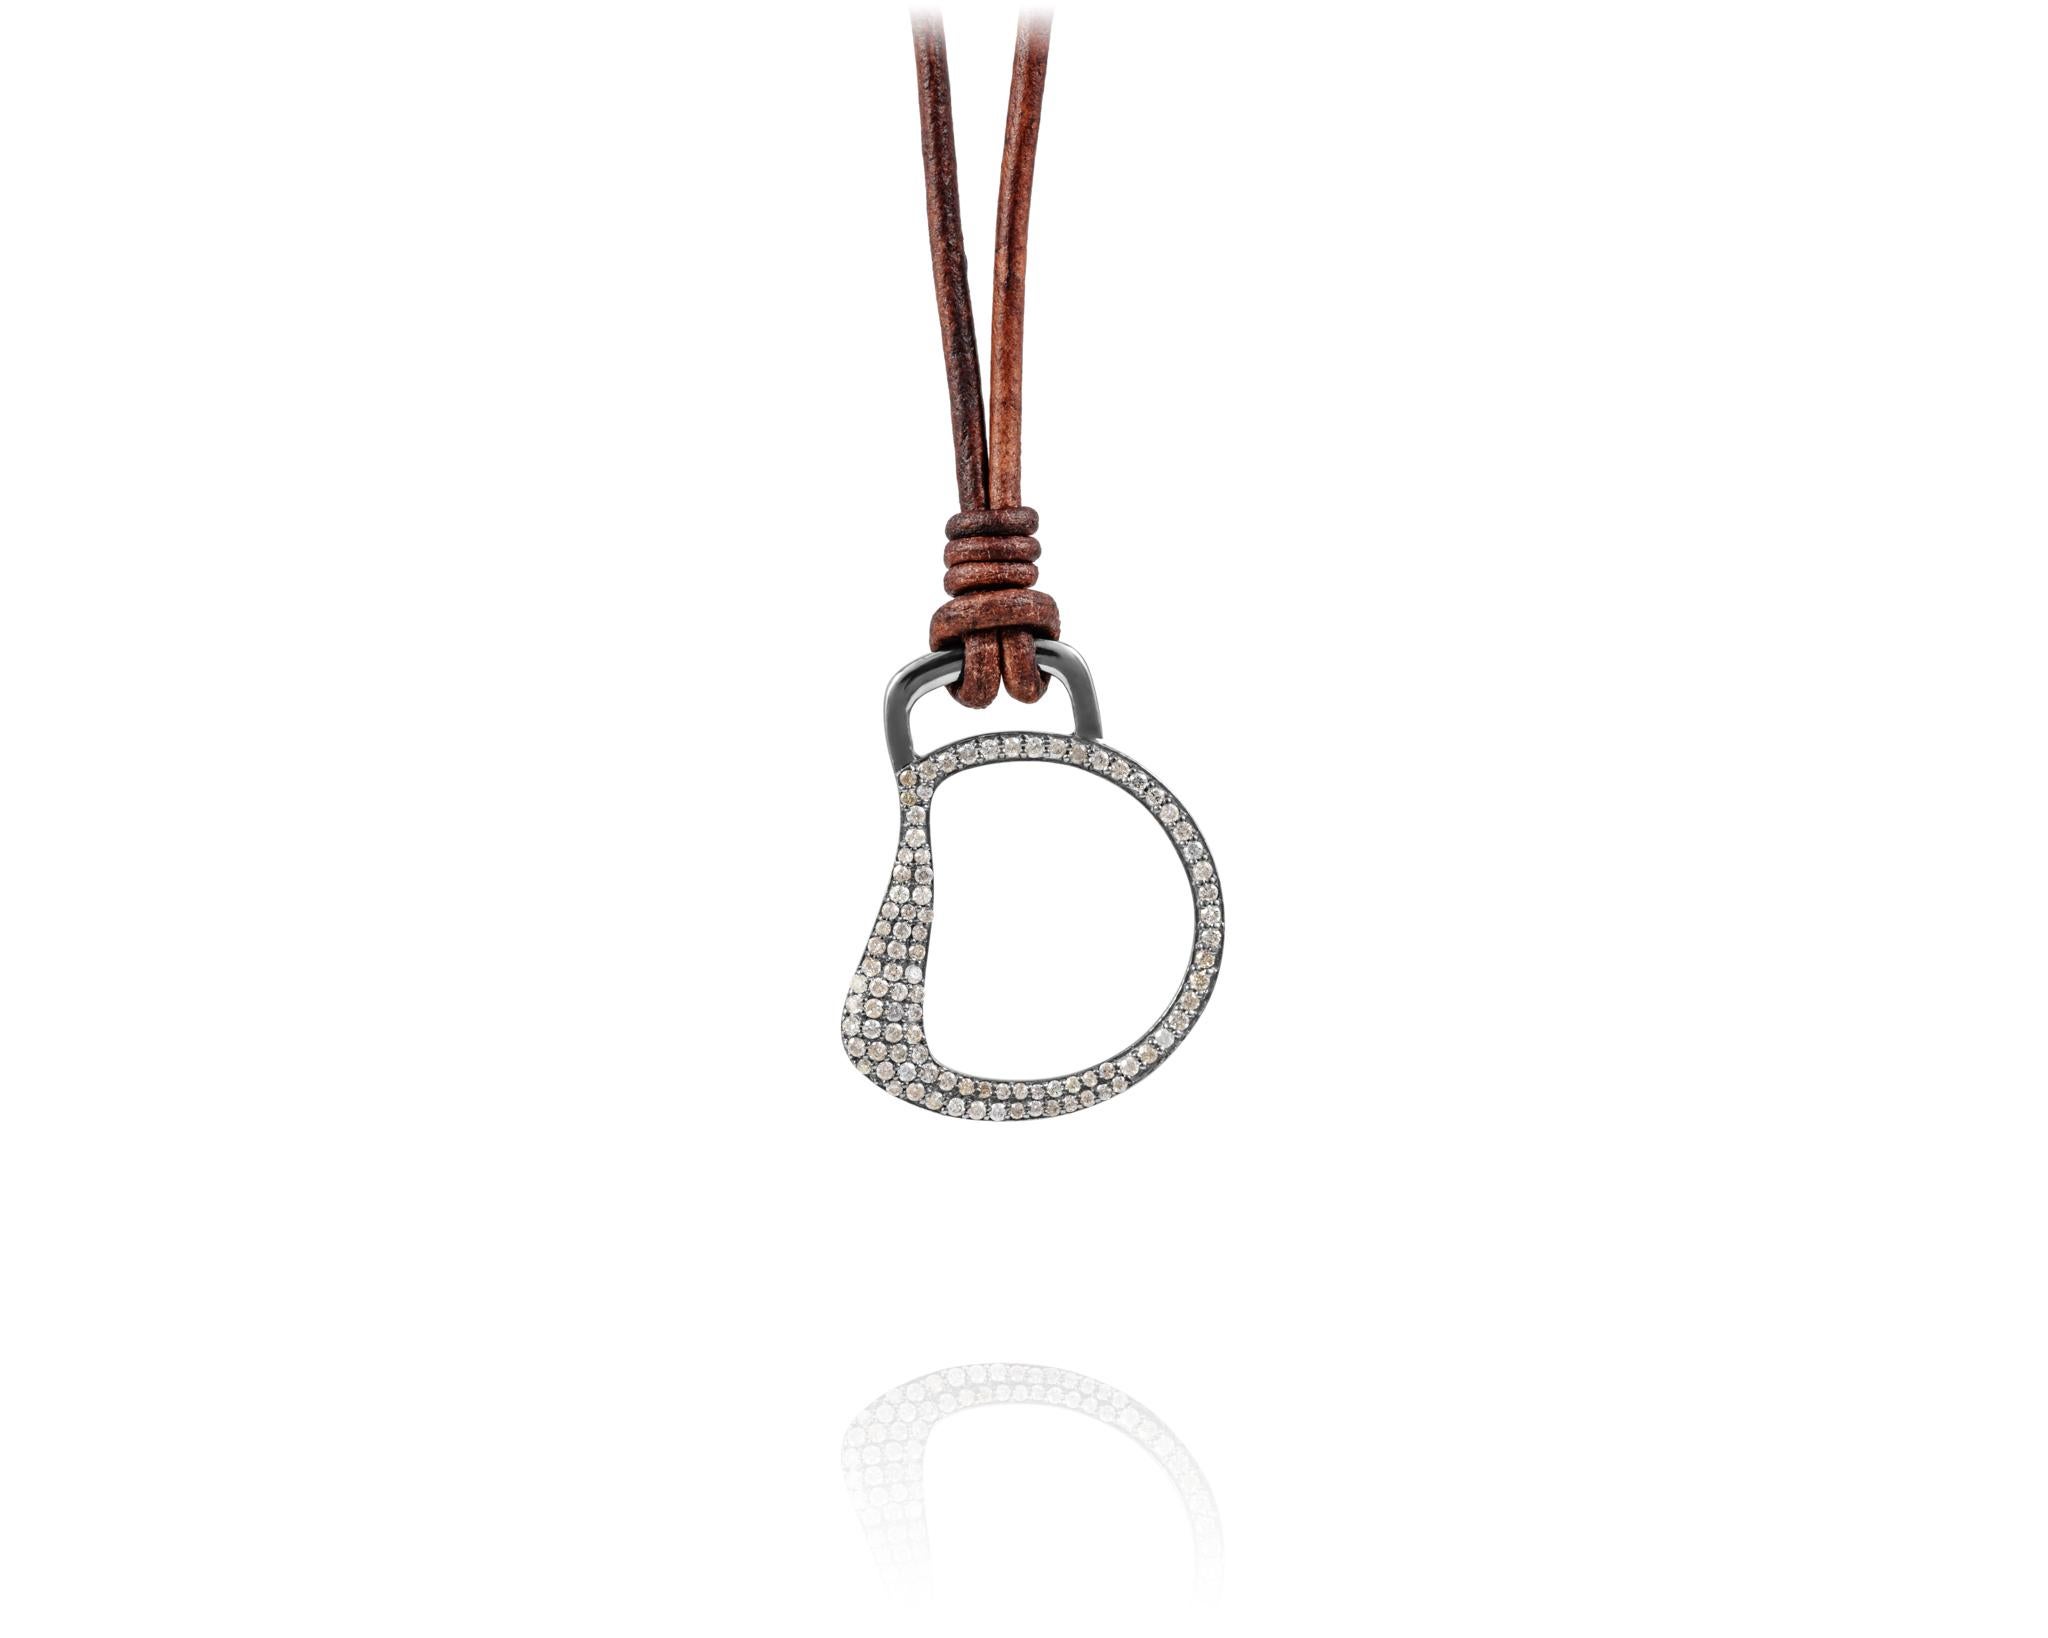 Part of the Vincent Peach Equestrian Collection, the Diamond Cheval Bit Necklace has .4ct Diamonds mounted in a Sterling Silver Bit Design on a Premium Brown Leather Cord with a luxurious Tahitian Pearl Clasp. The Cheval Bit Necklace comes in the